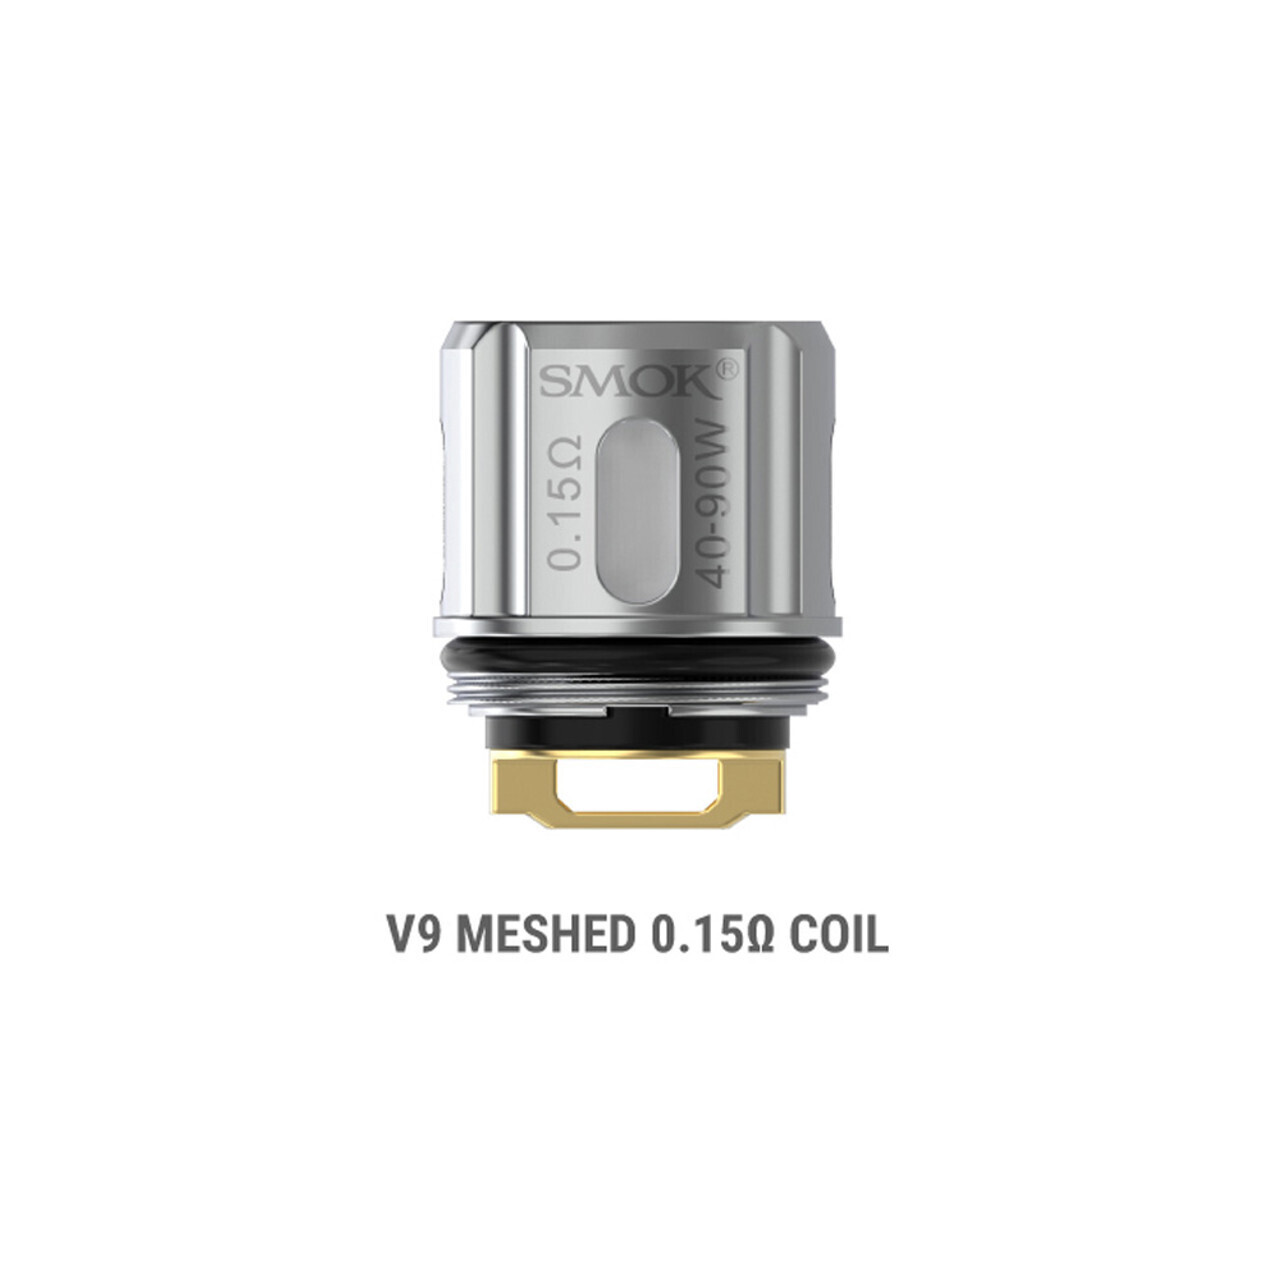 SMOK TFV9 0.15 MESH COIL PACK OF 5